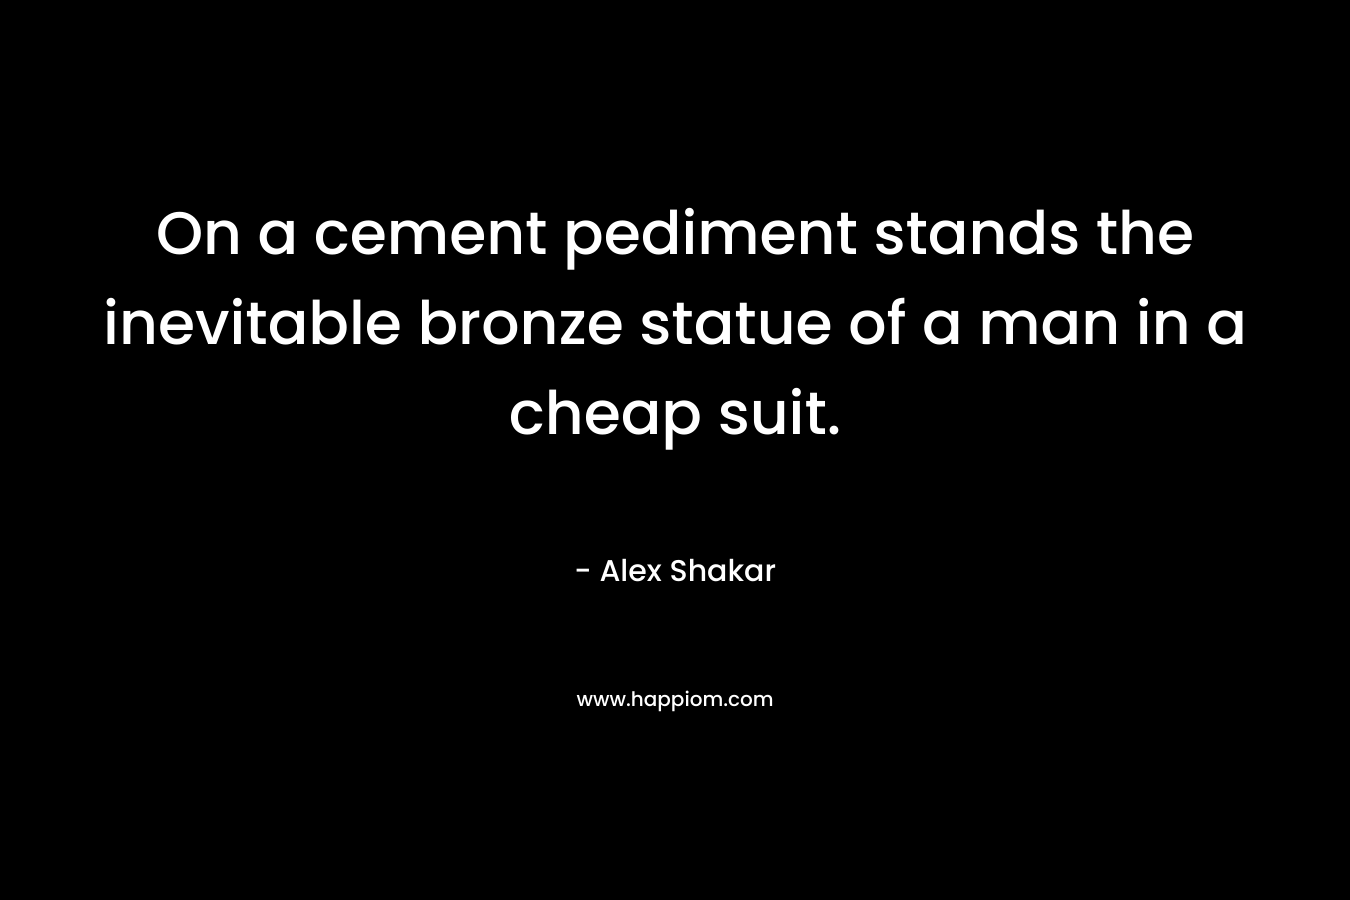 On a cement pediment stands the inevitable bronze statue of a man in a cheap suit. – Alex Shakar